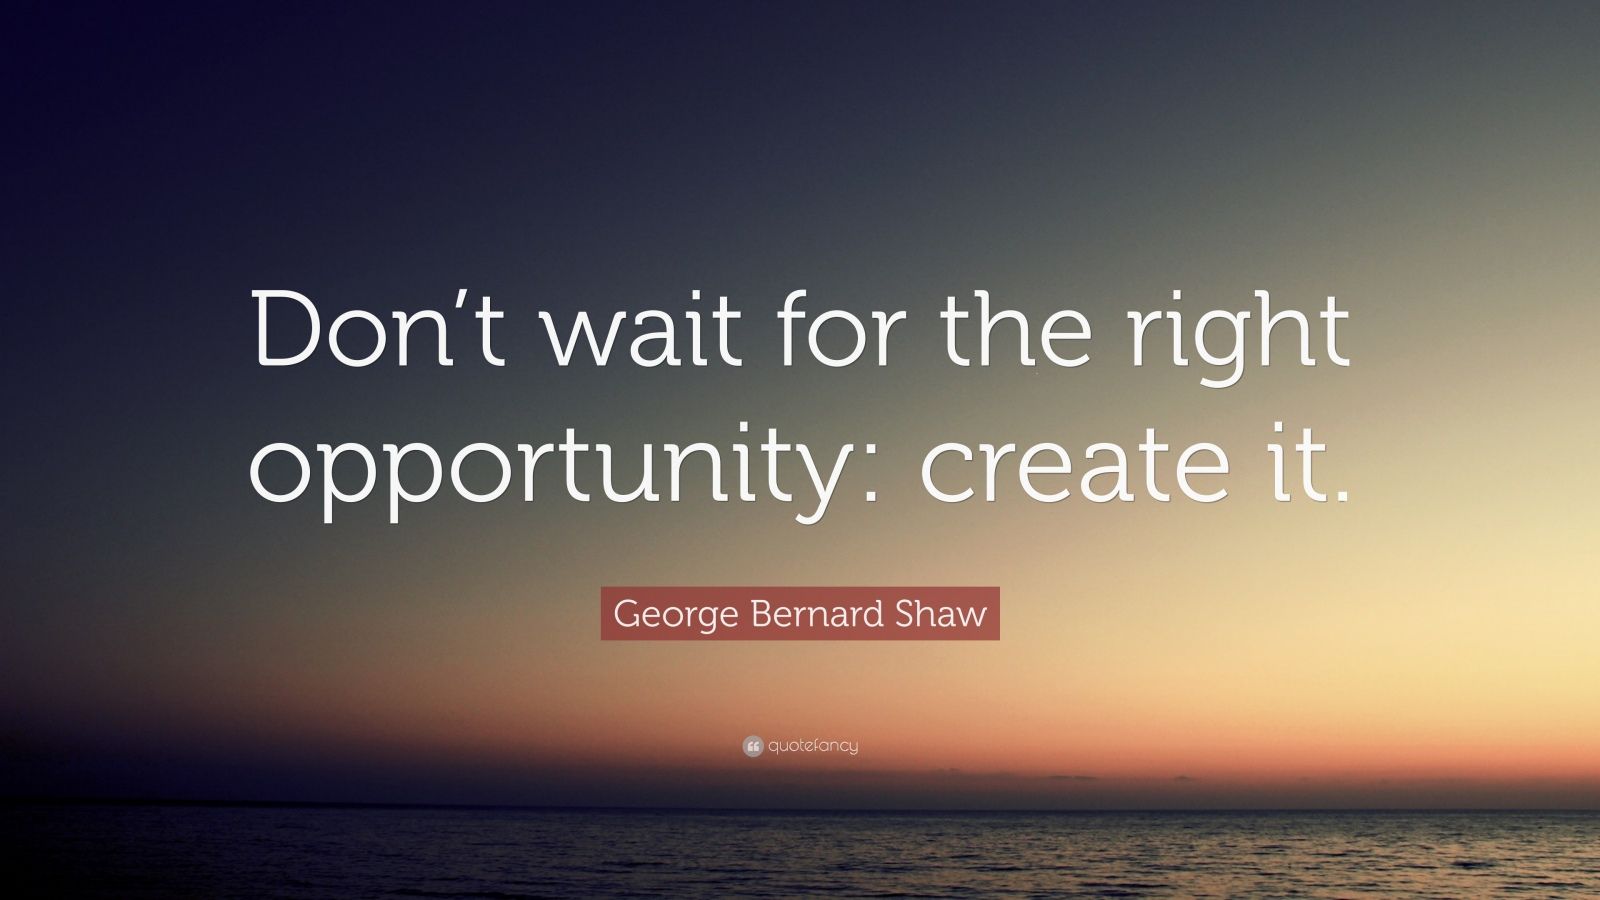 George Bernard Shaw Quote: “Don’t wait for the right opportunity